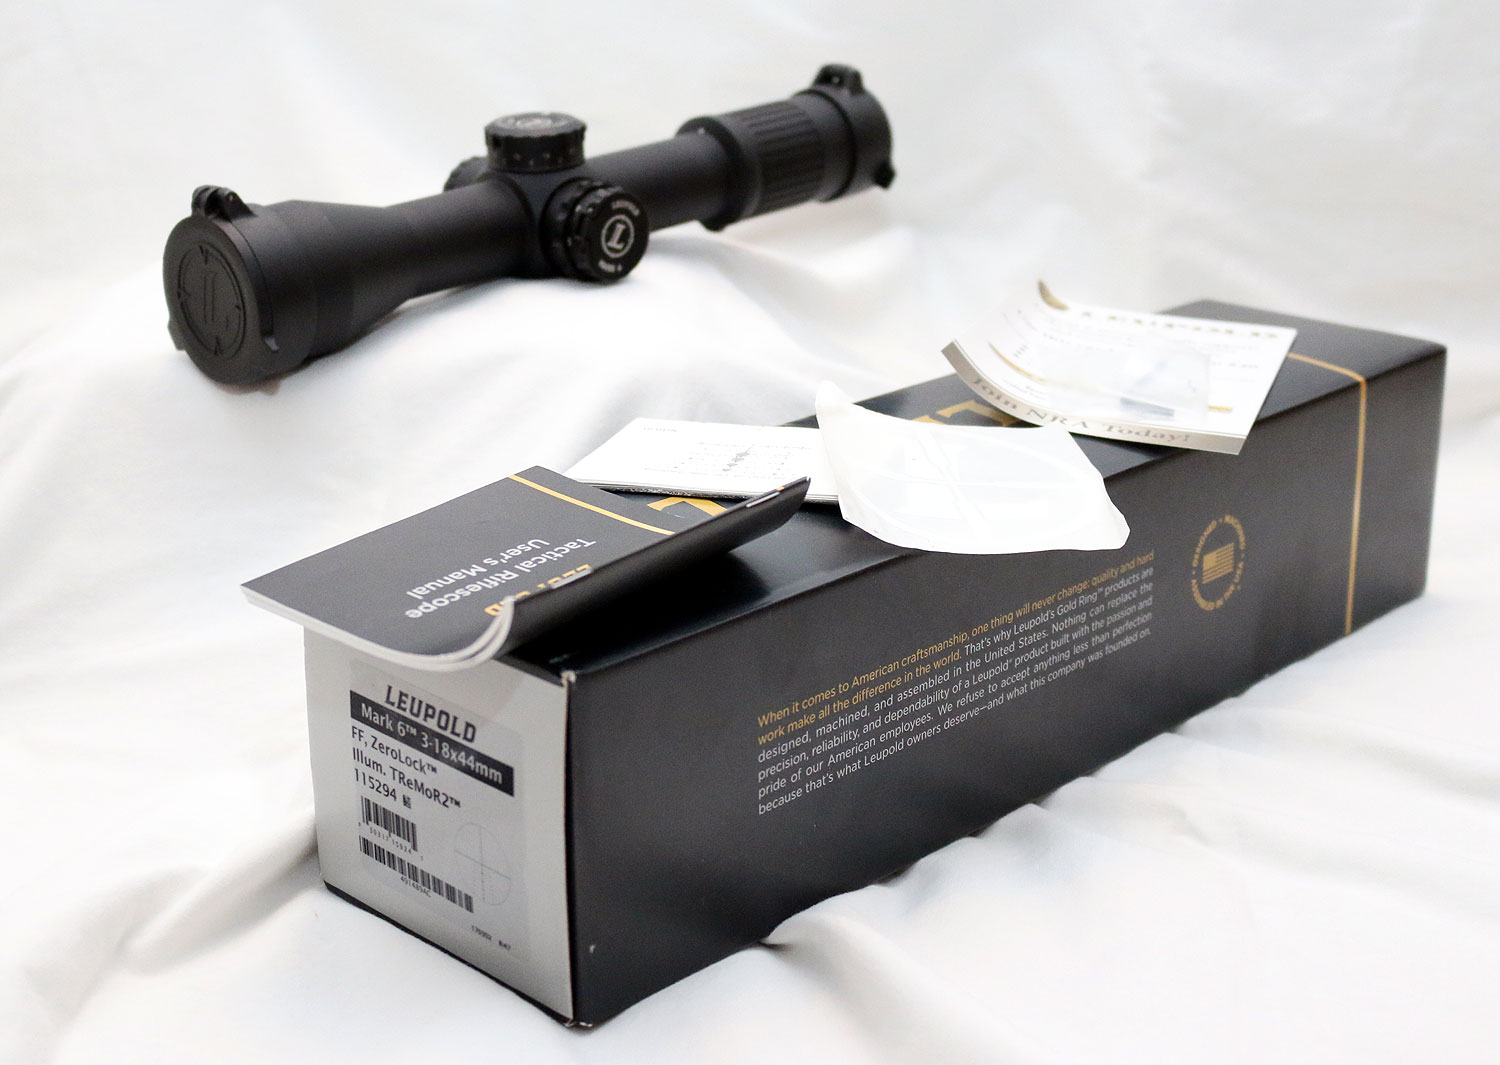 The Mark 6 arrives in the traditional Leupold box and includes a user manua...